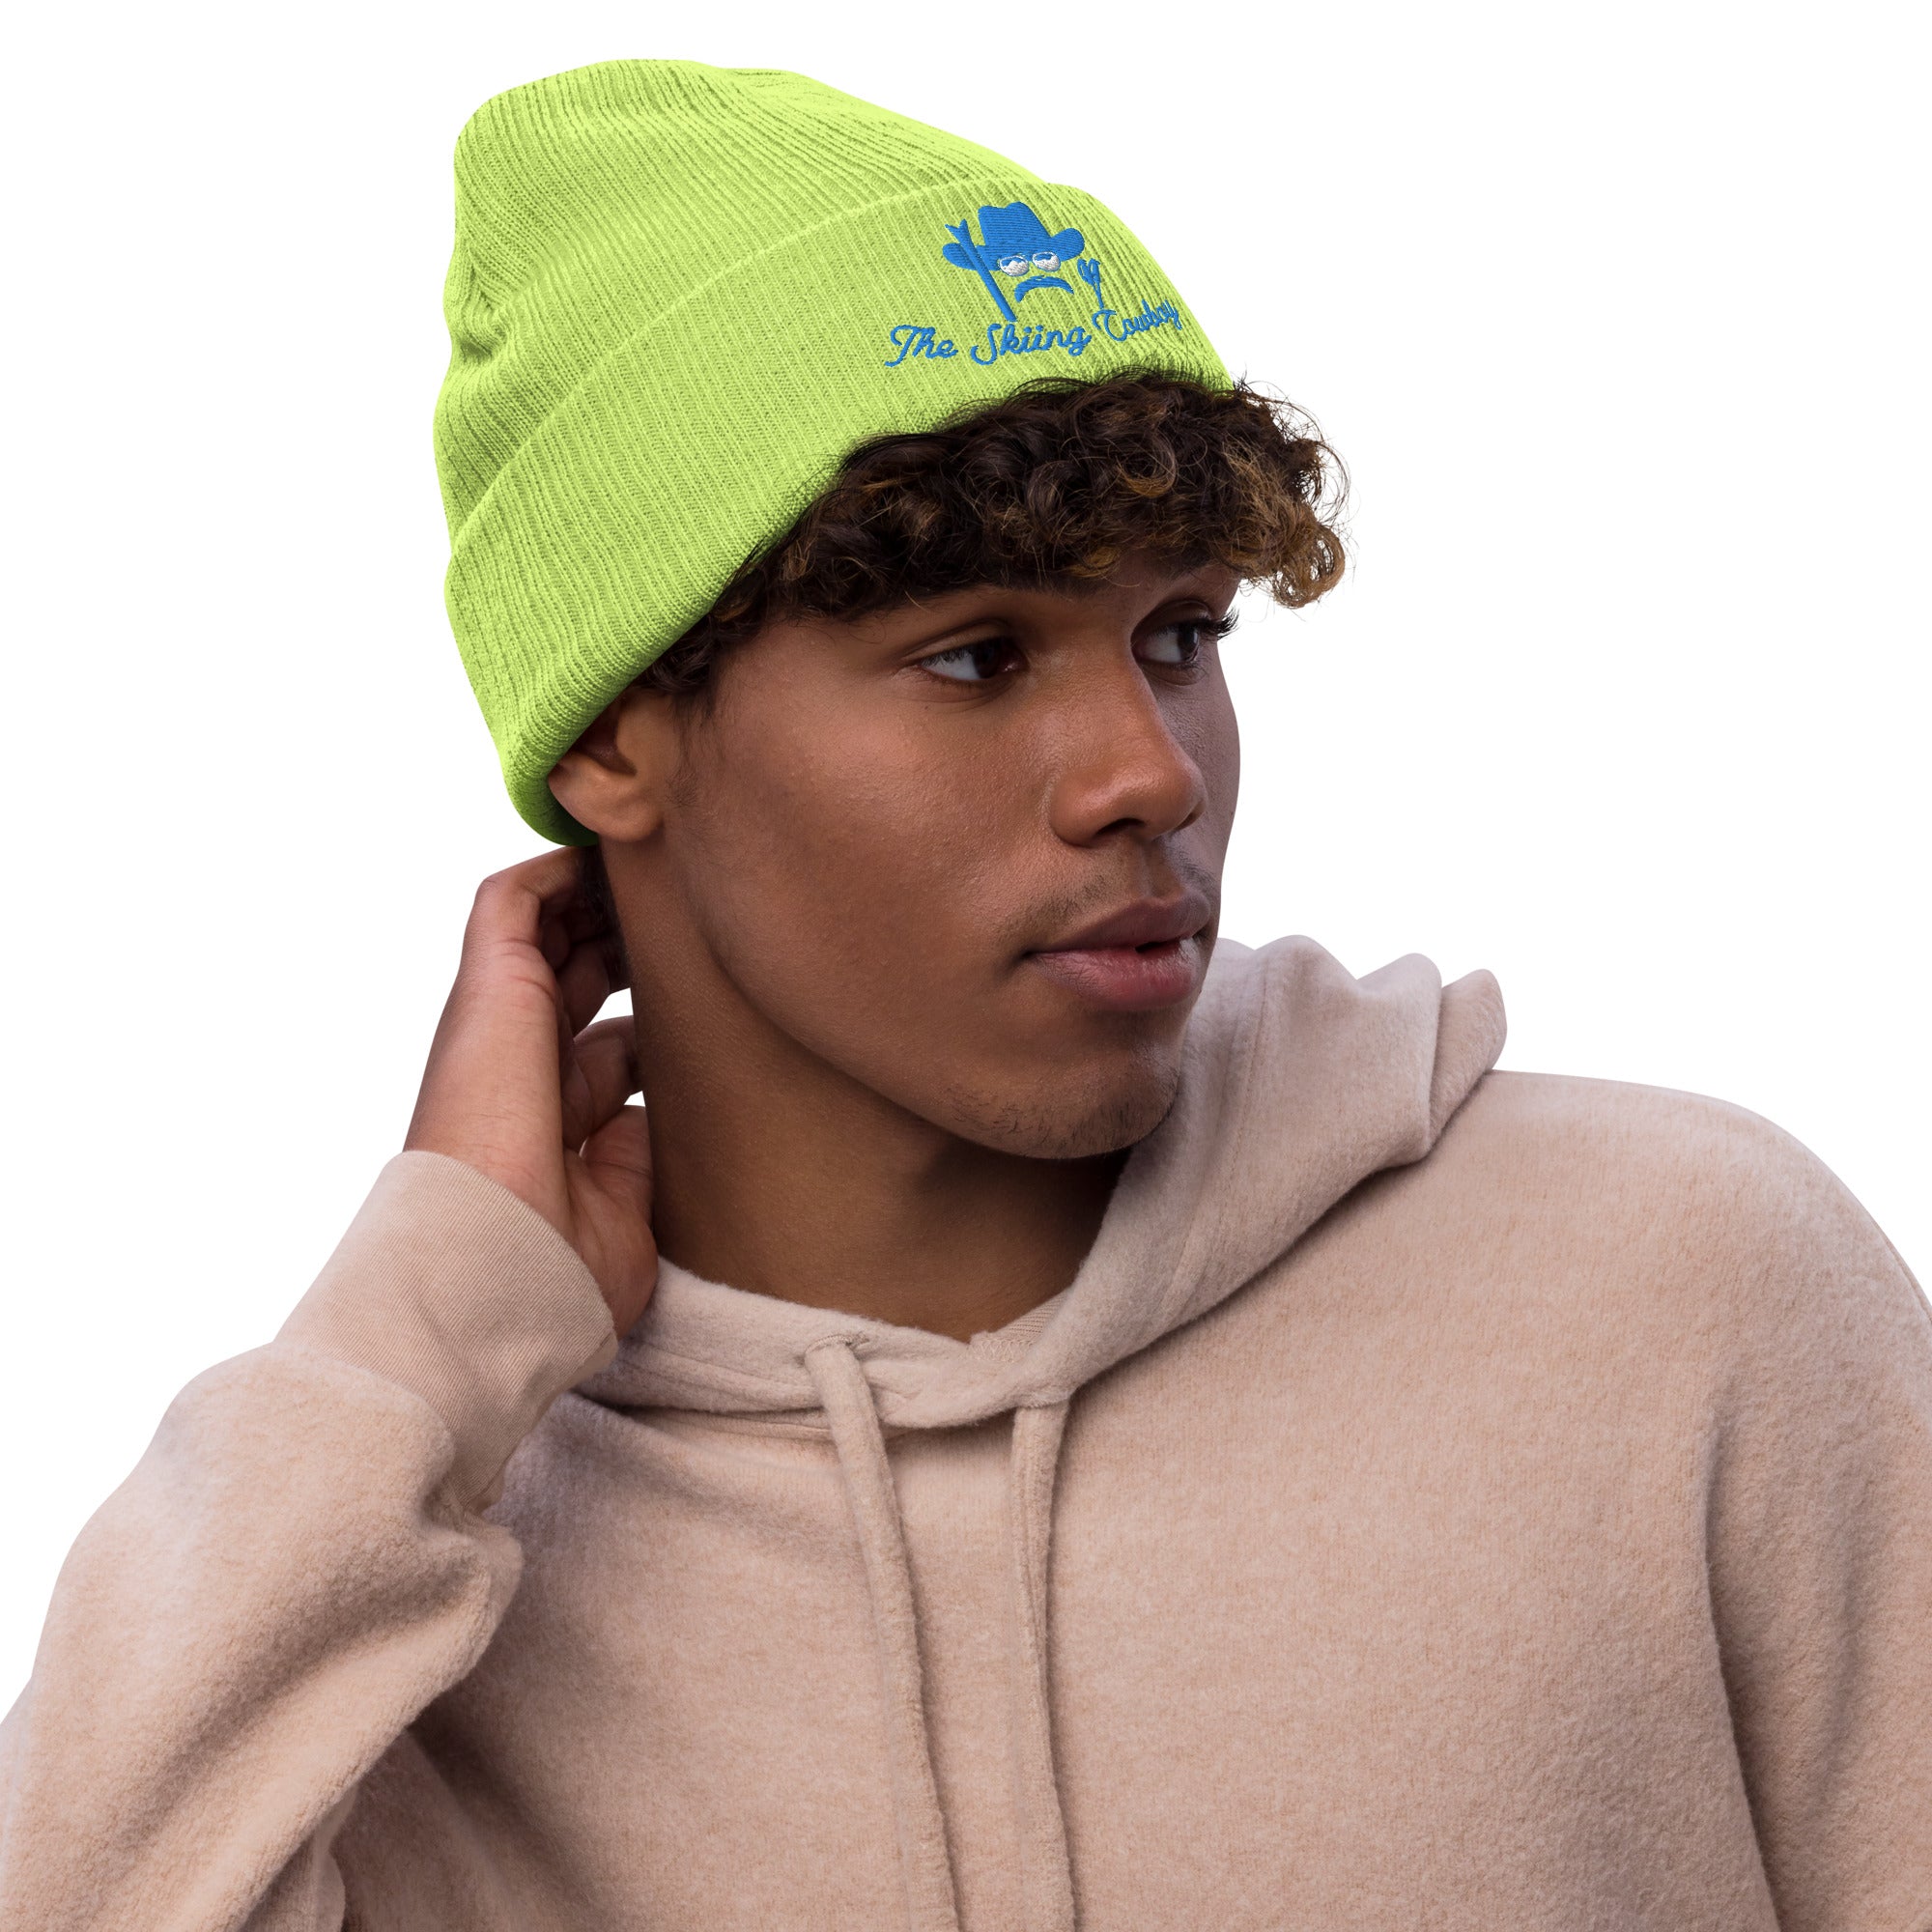 Eco ribbed knit beanie The Skiing Cowboy Blue